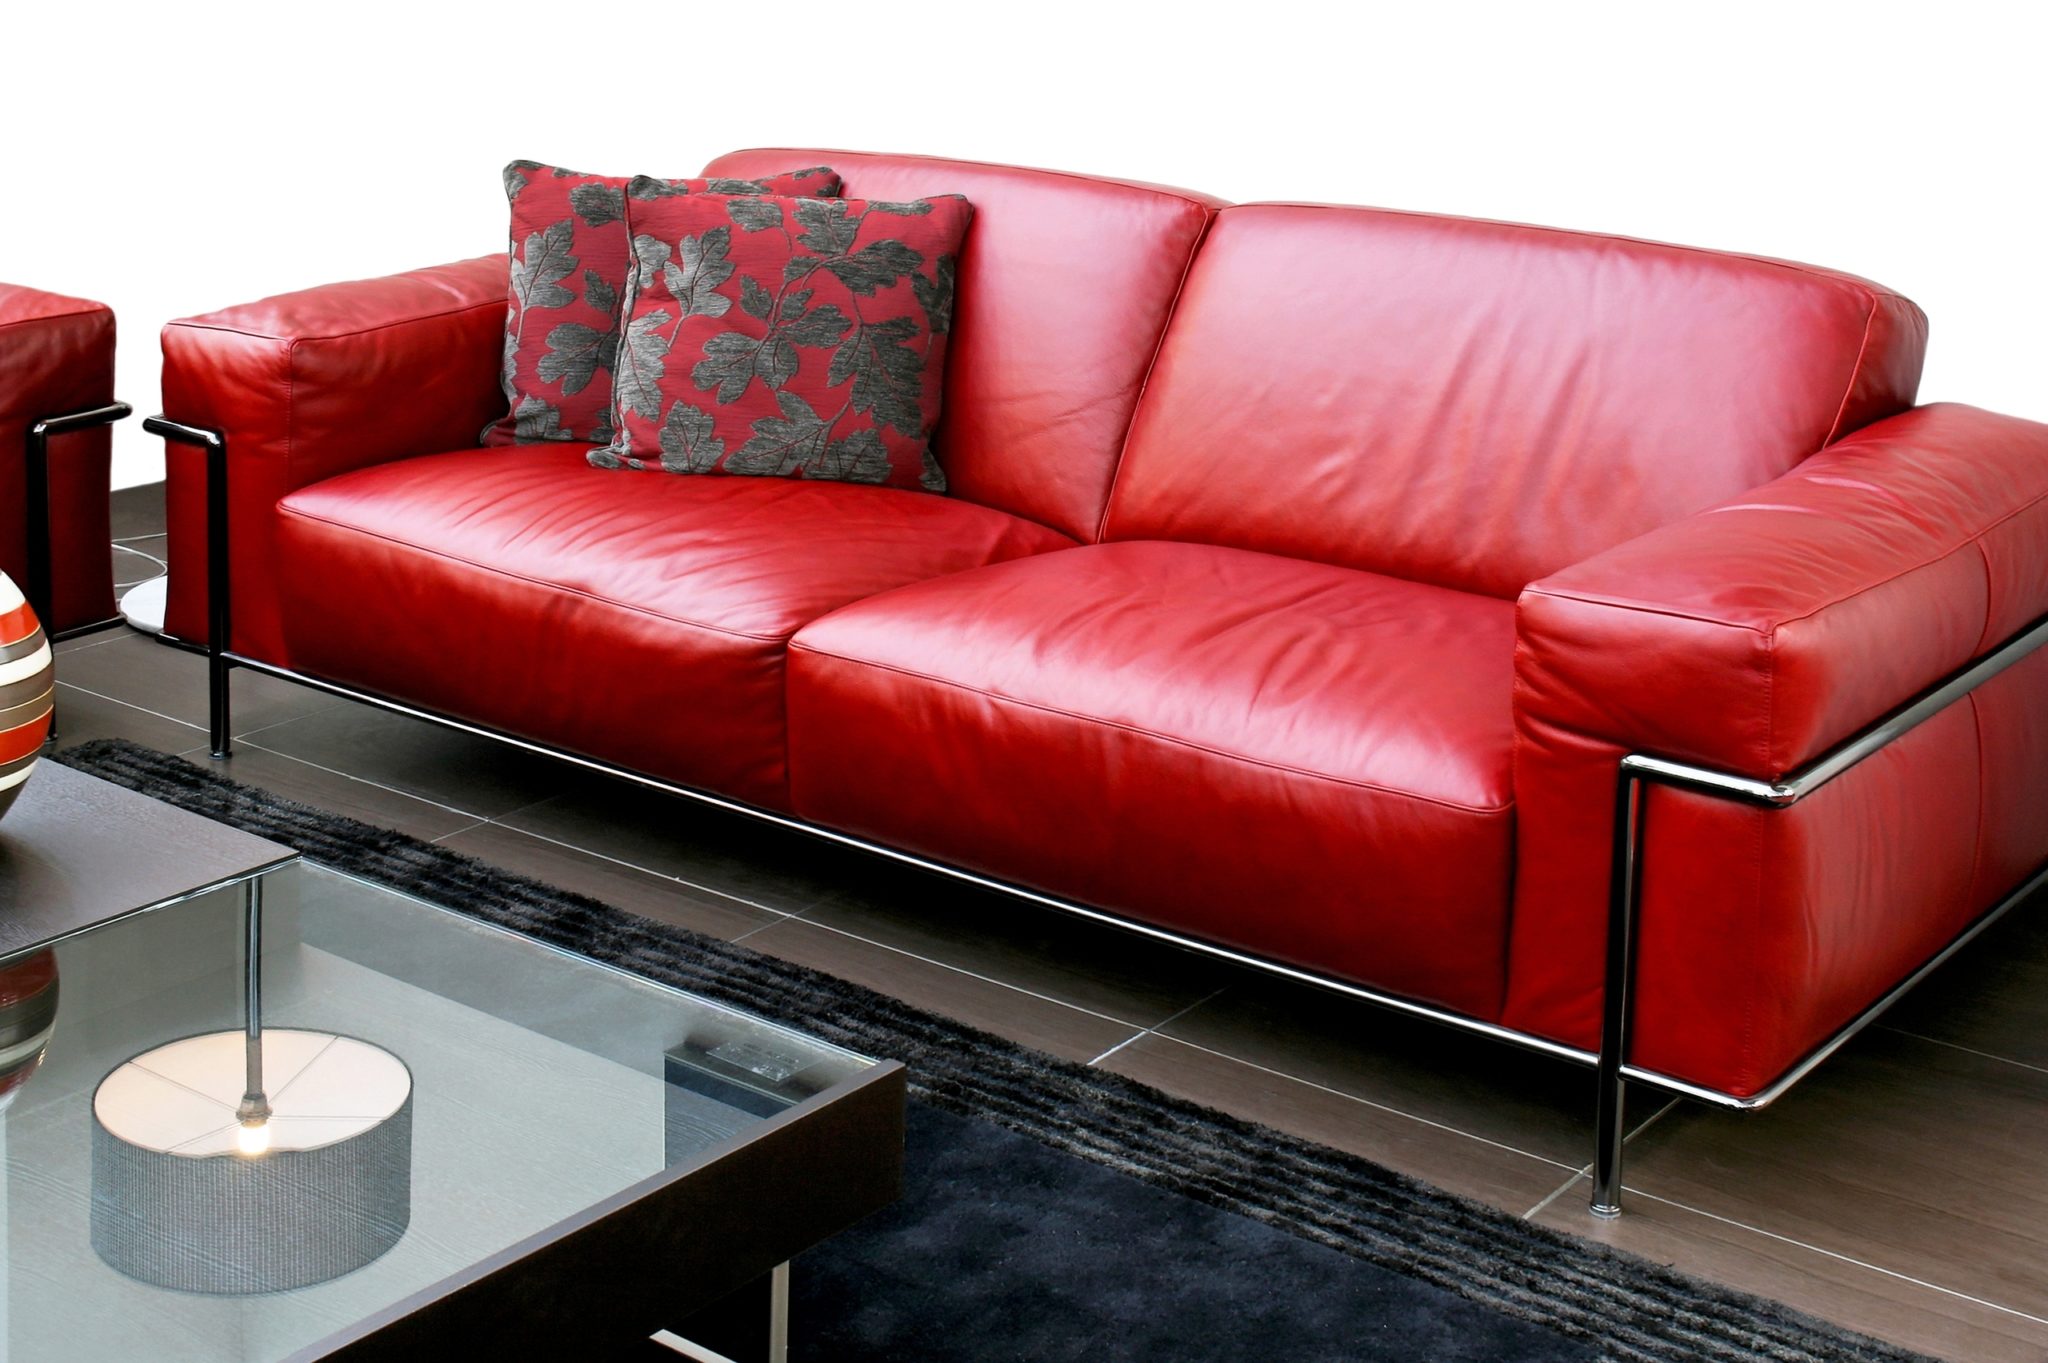 black leather sofa with red pillows